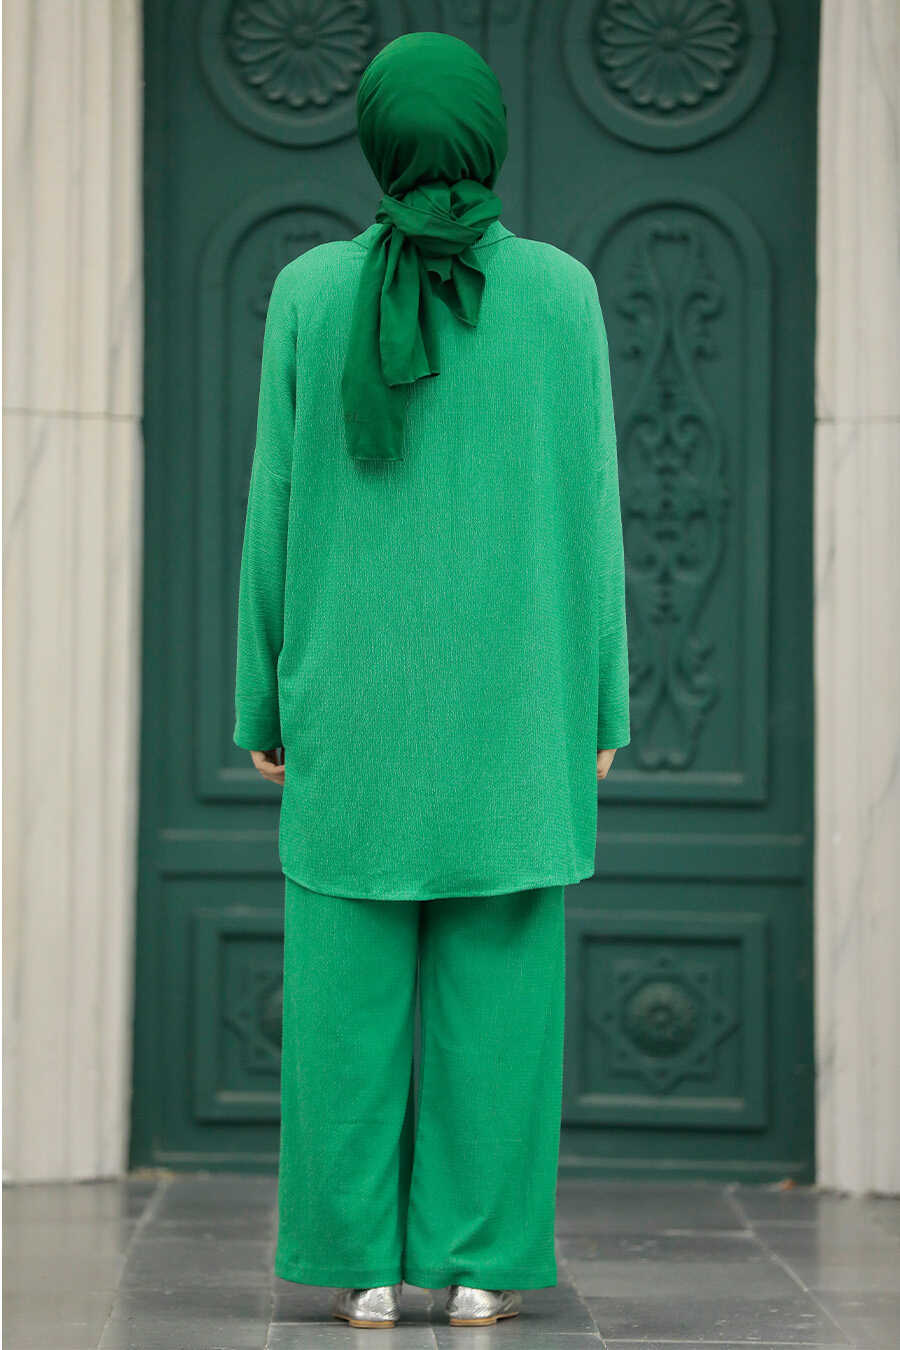 Neva Style - Green High Quality Dual Suit 41771Y